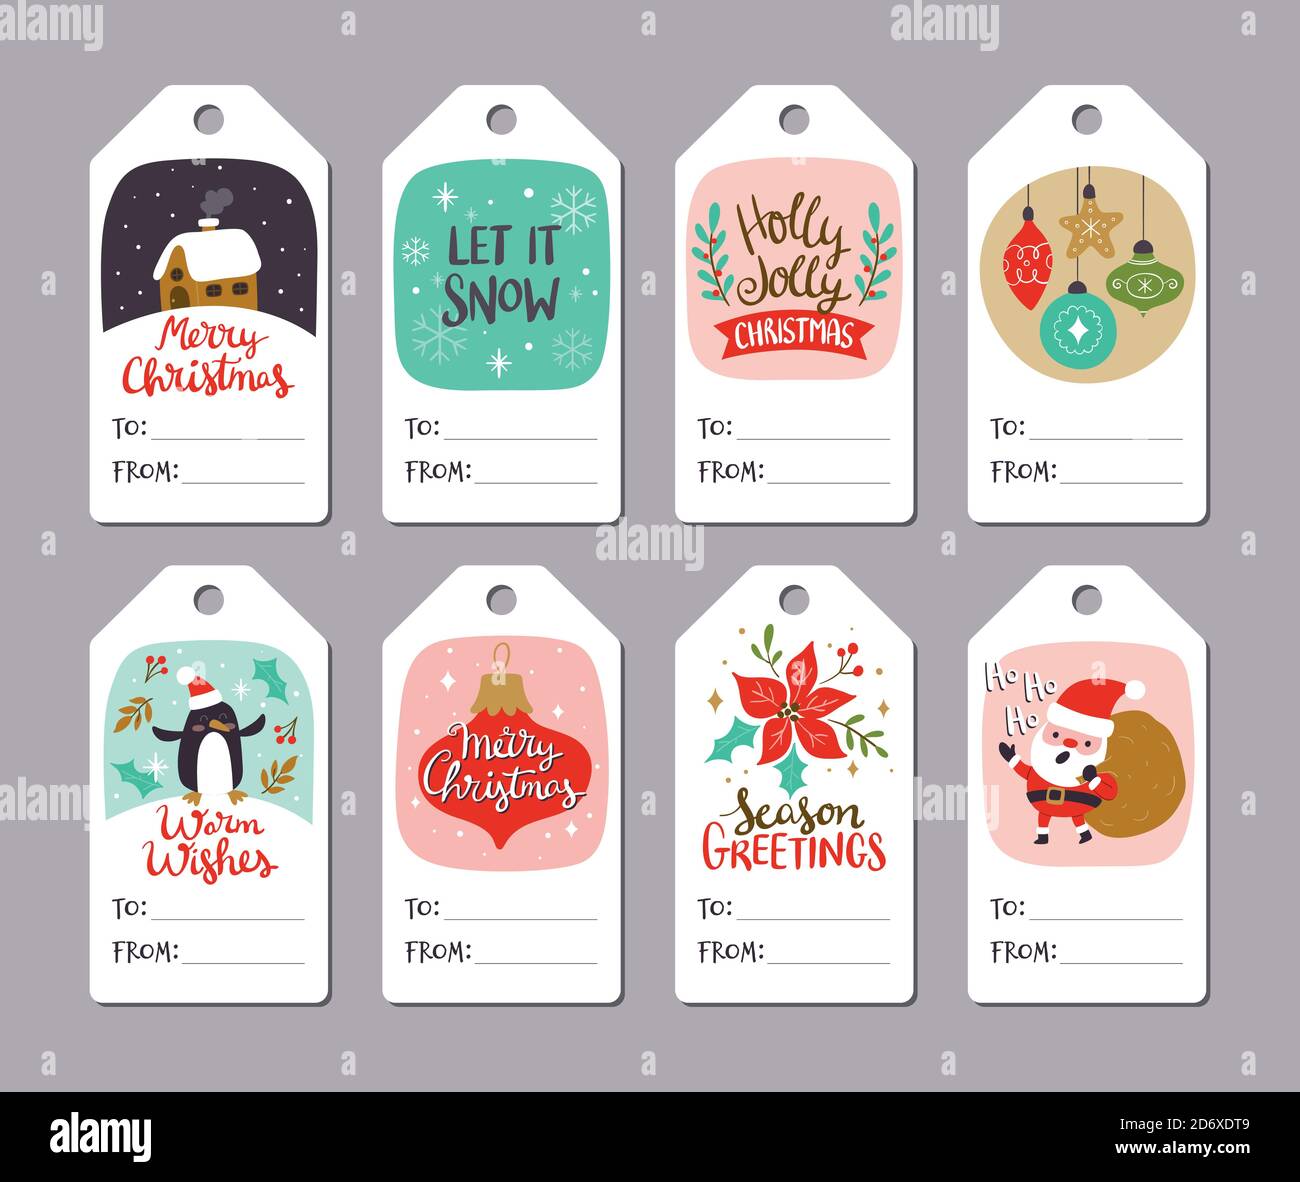 collection-of-christmas-hang-tags-with-editable-blank-space-perfect-to